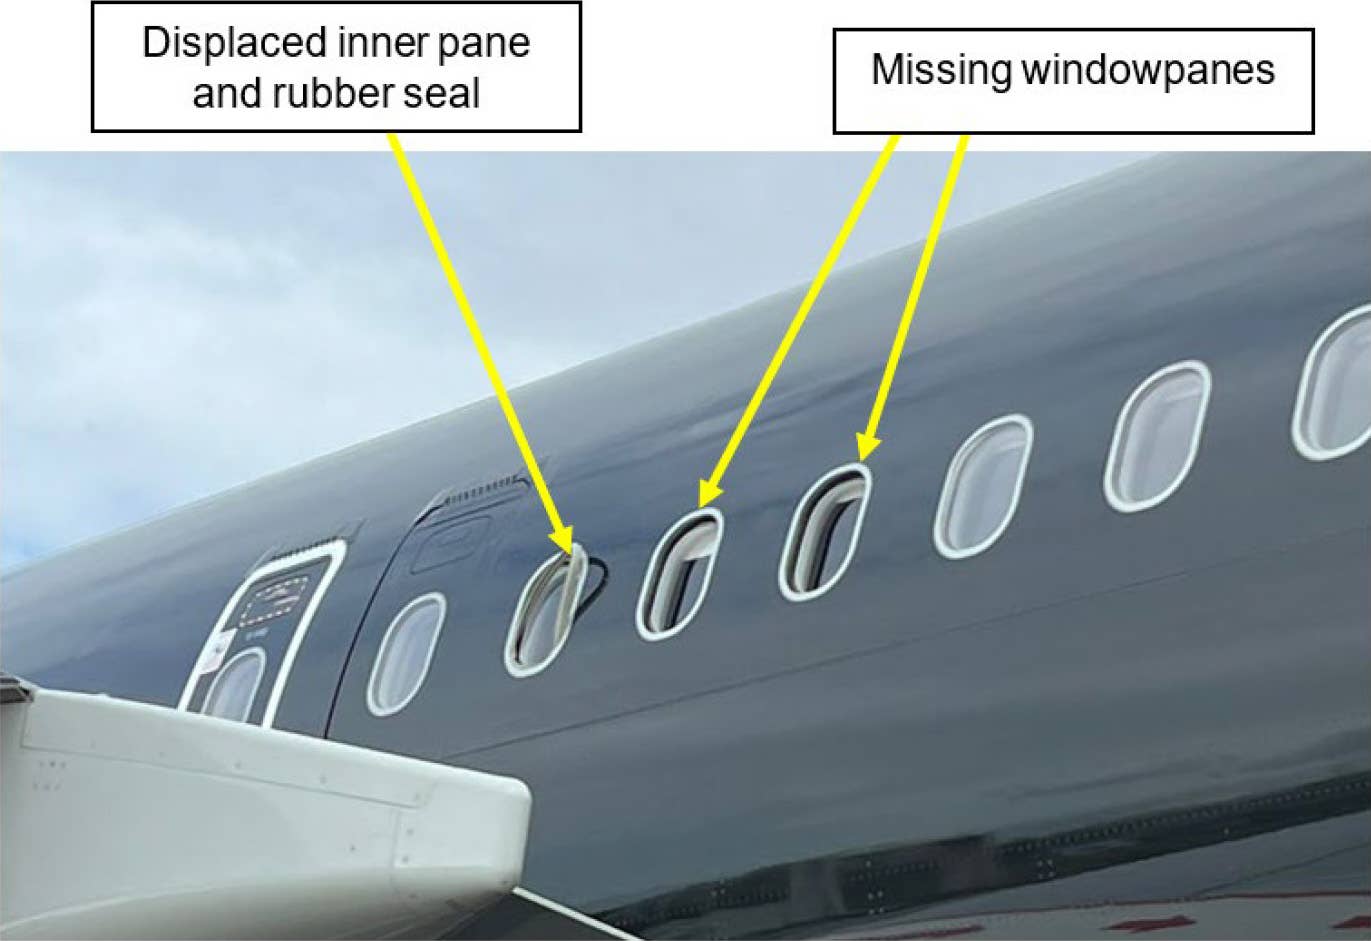 Image showing three damaged windows missing outer panes on the affected airliner